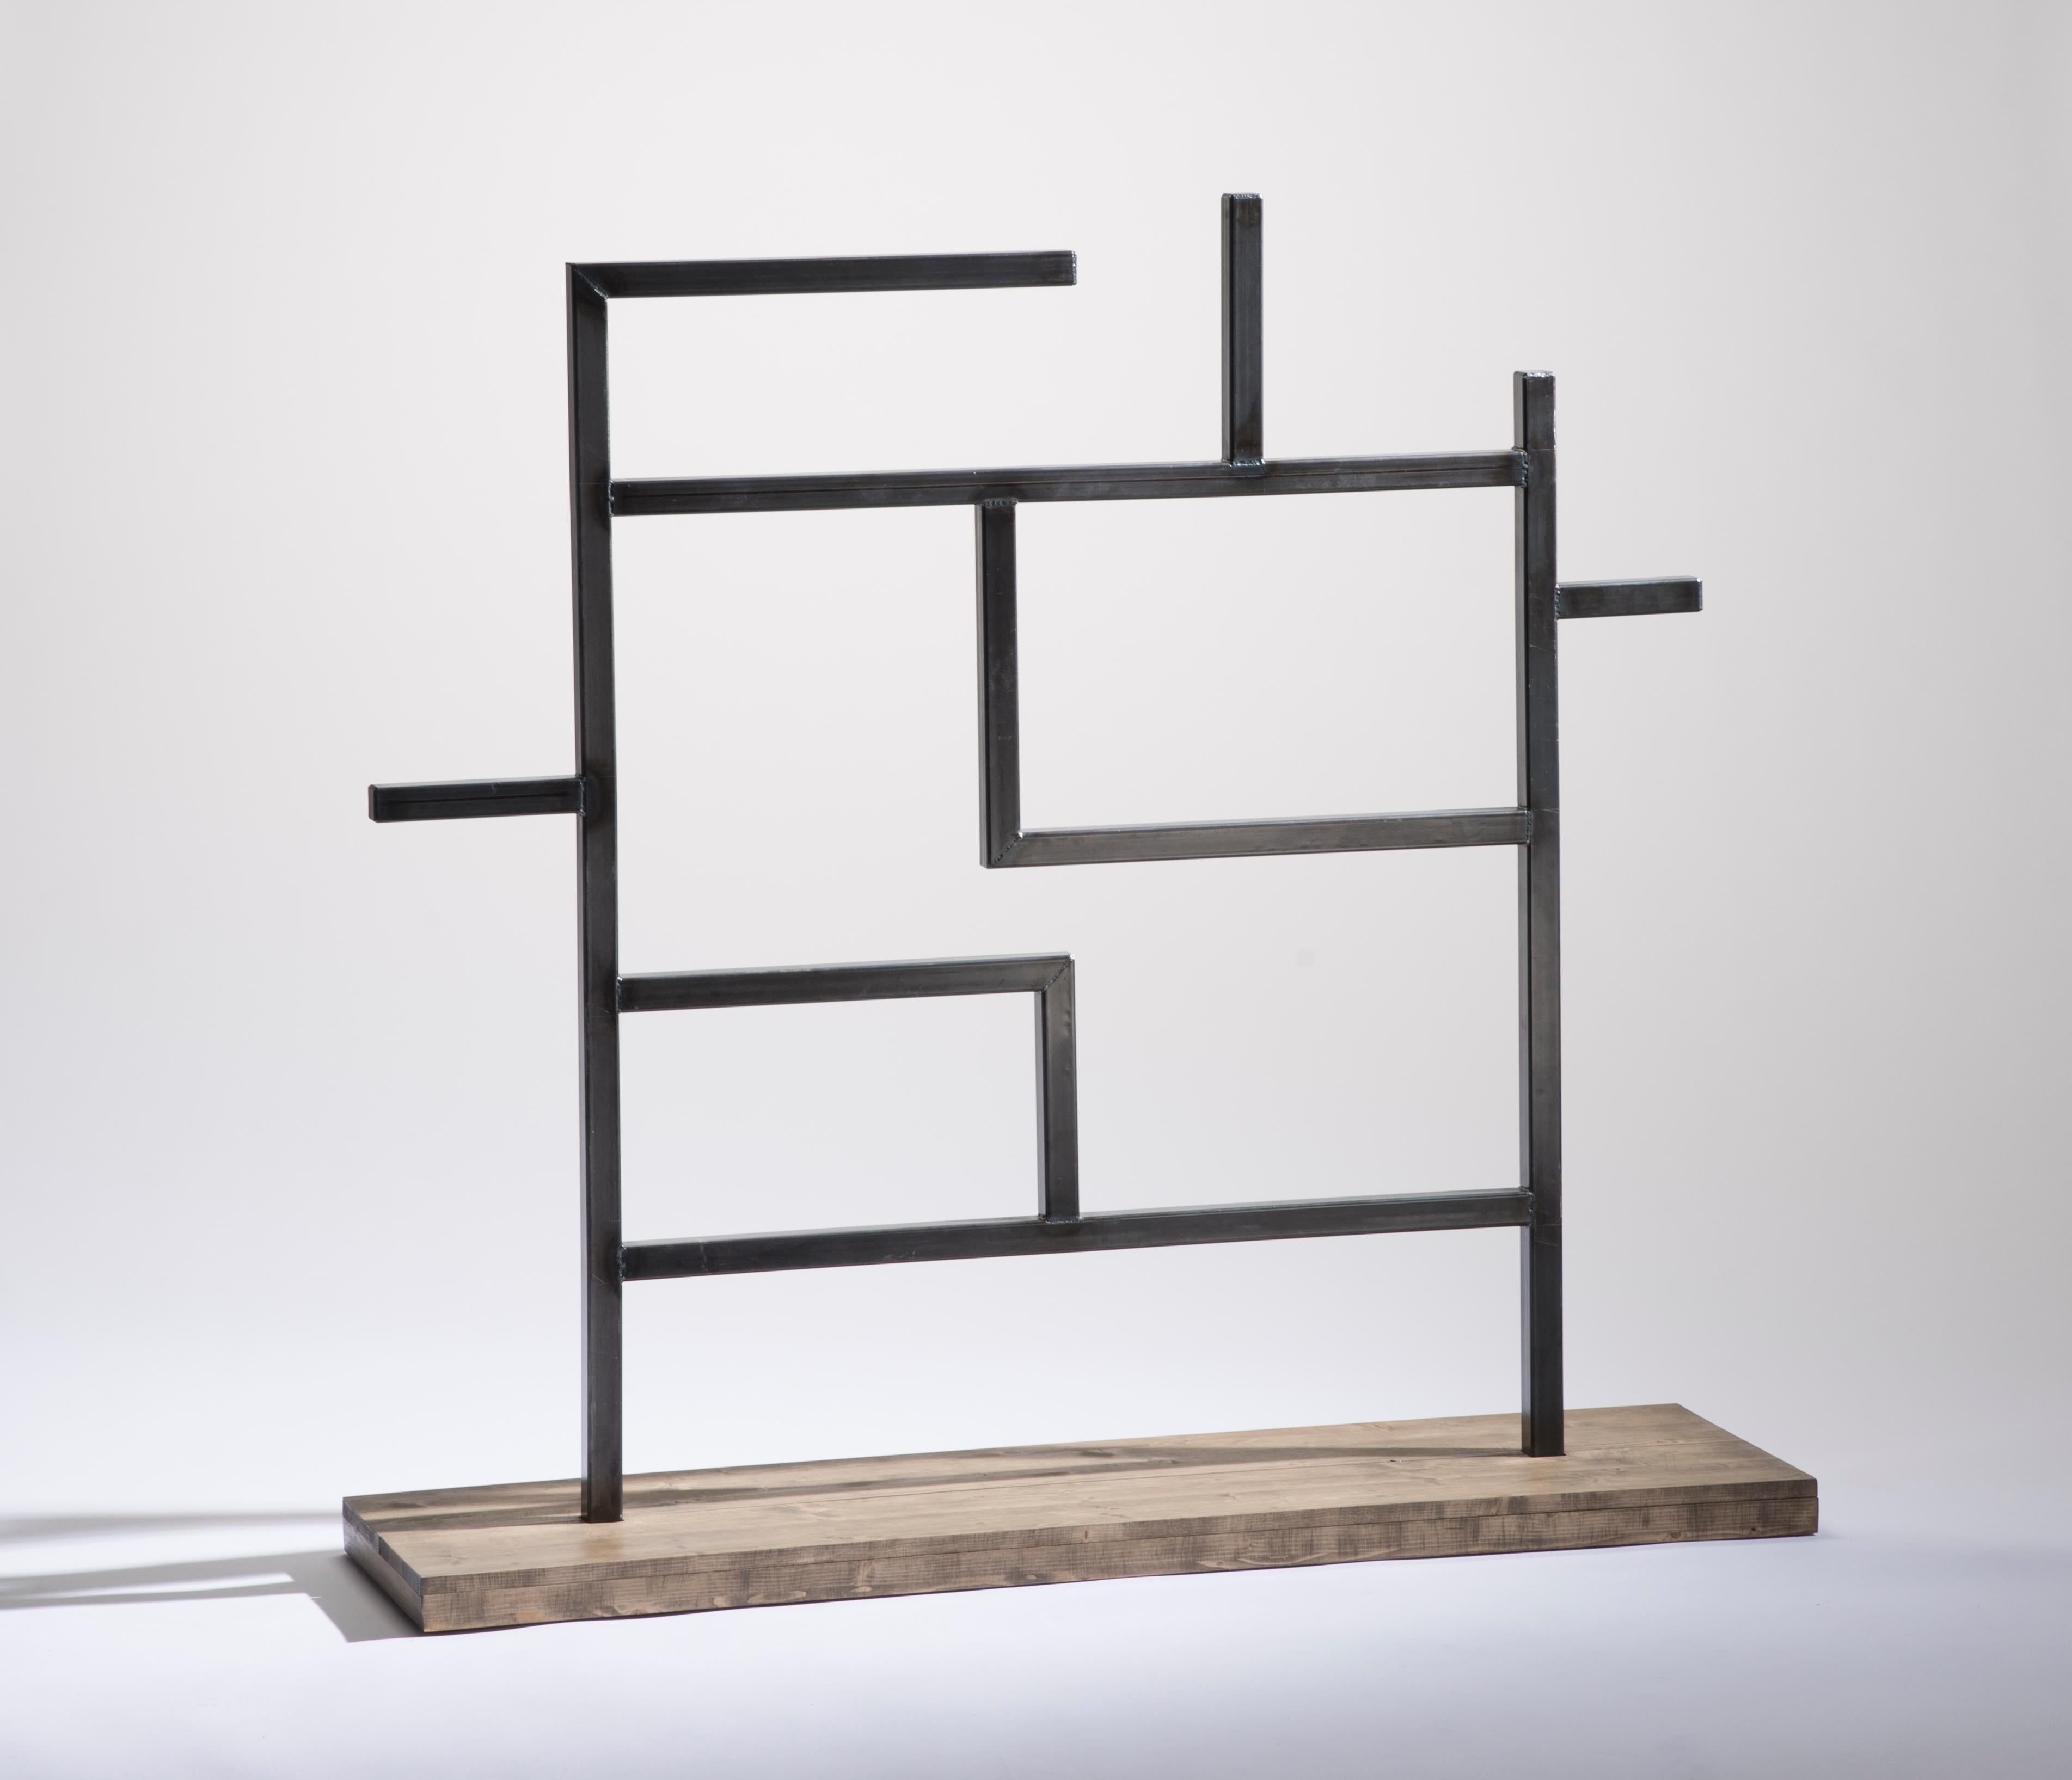 Perpendicular frame by  Lenny Stöpp
Materials: Raw steel, ash wood 
Finishes: Oiled (steel), greywash (wood)
Dimensions: ±140 x 135 x 40cm
  
Product info: wood is a natural product there can be difference in the wood grain and